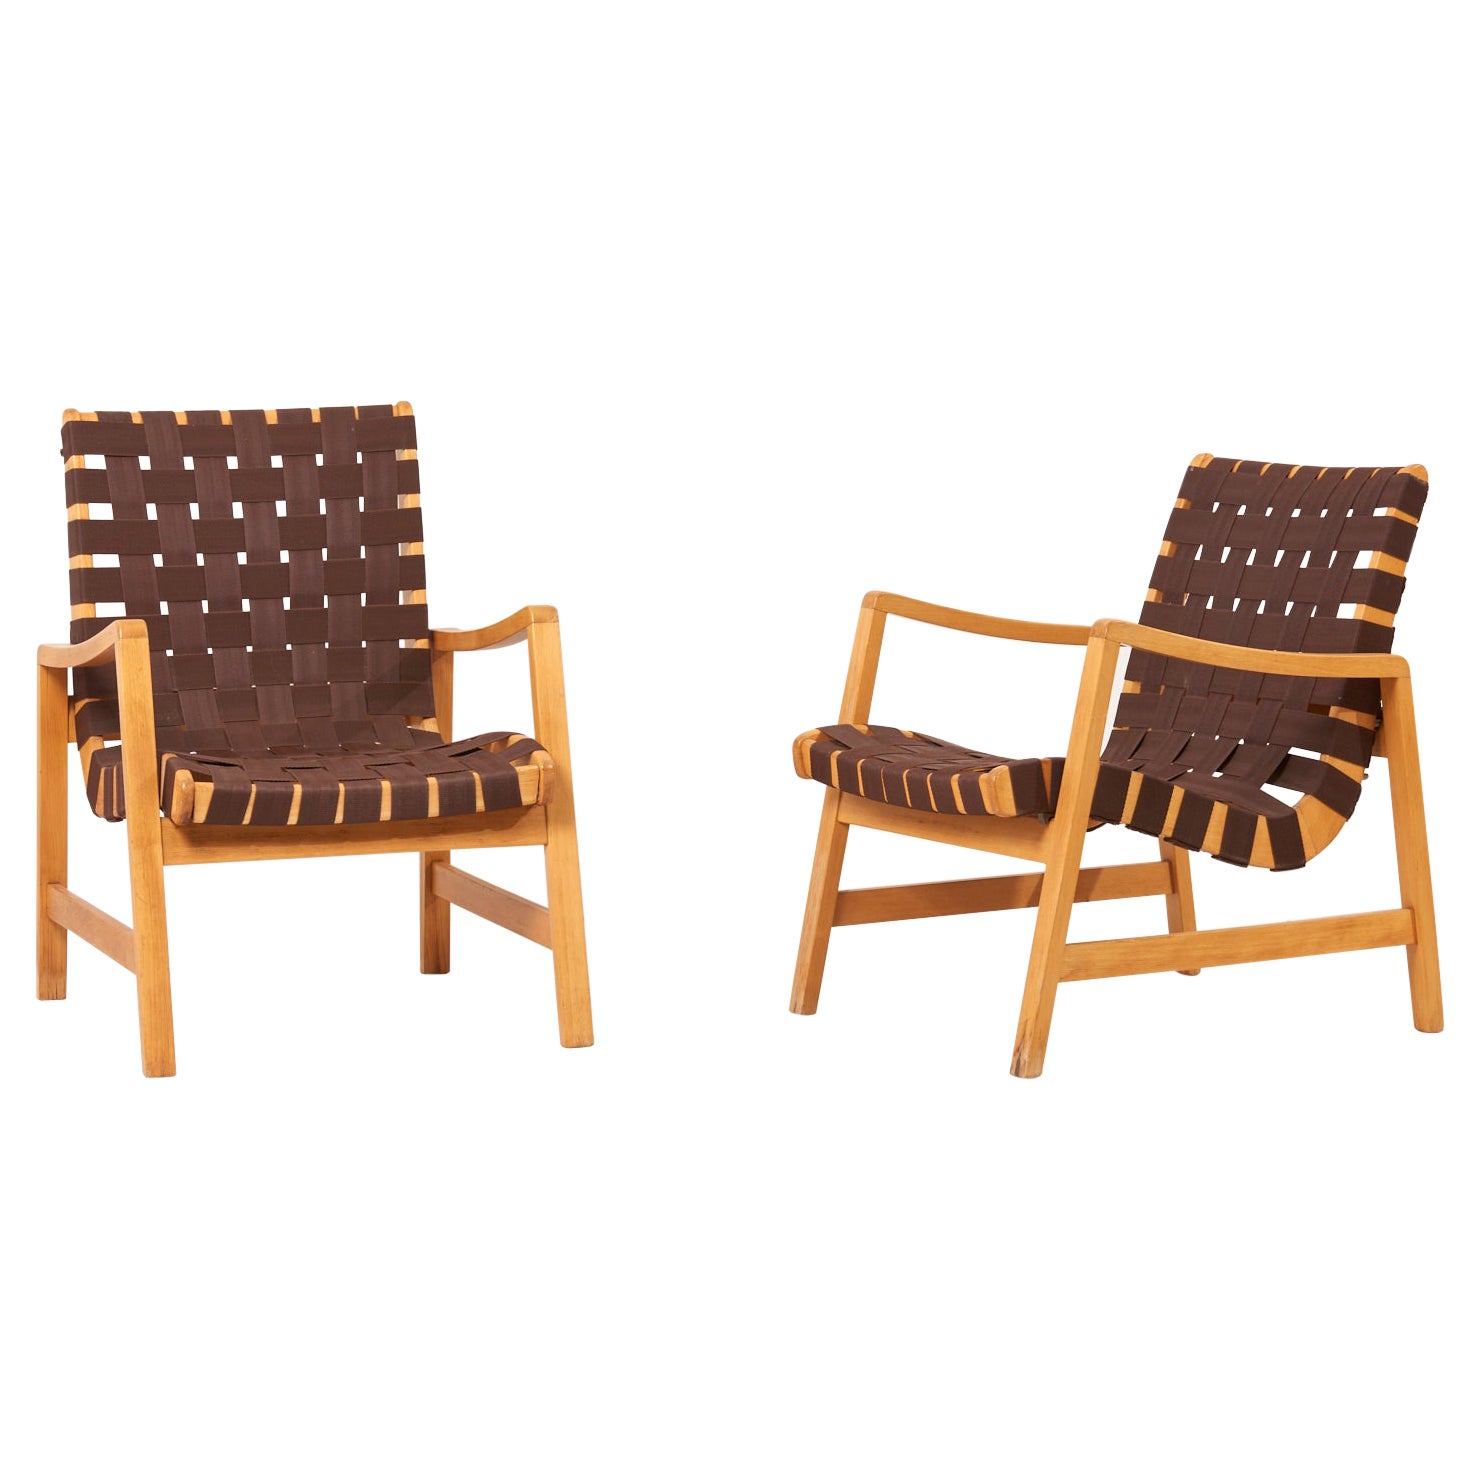 Pair of Jens Risom Lounge Chairs in Brown Webbing for Knoll, 1950s